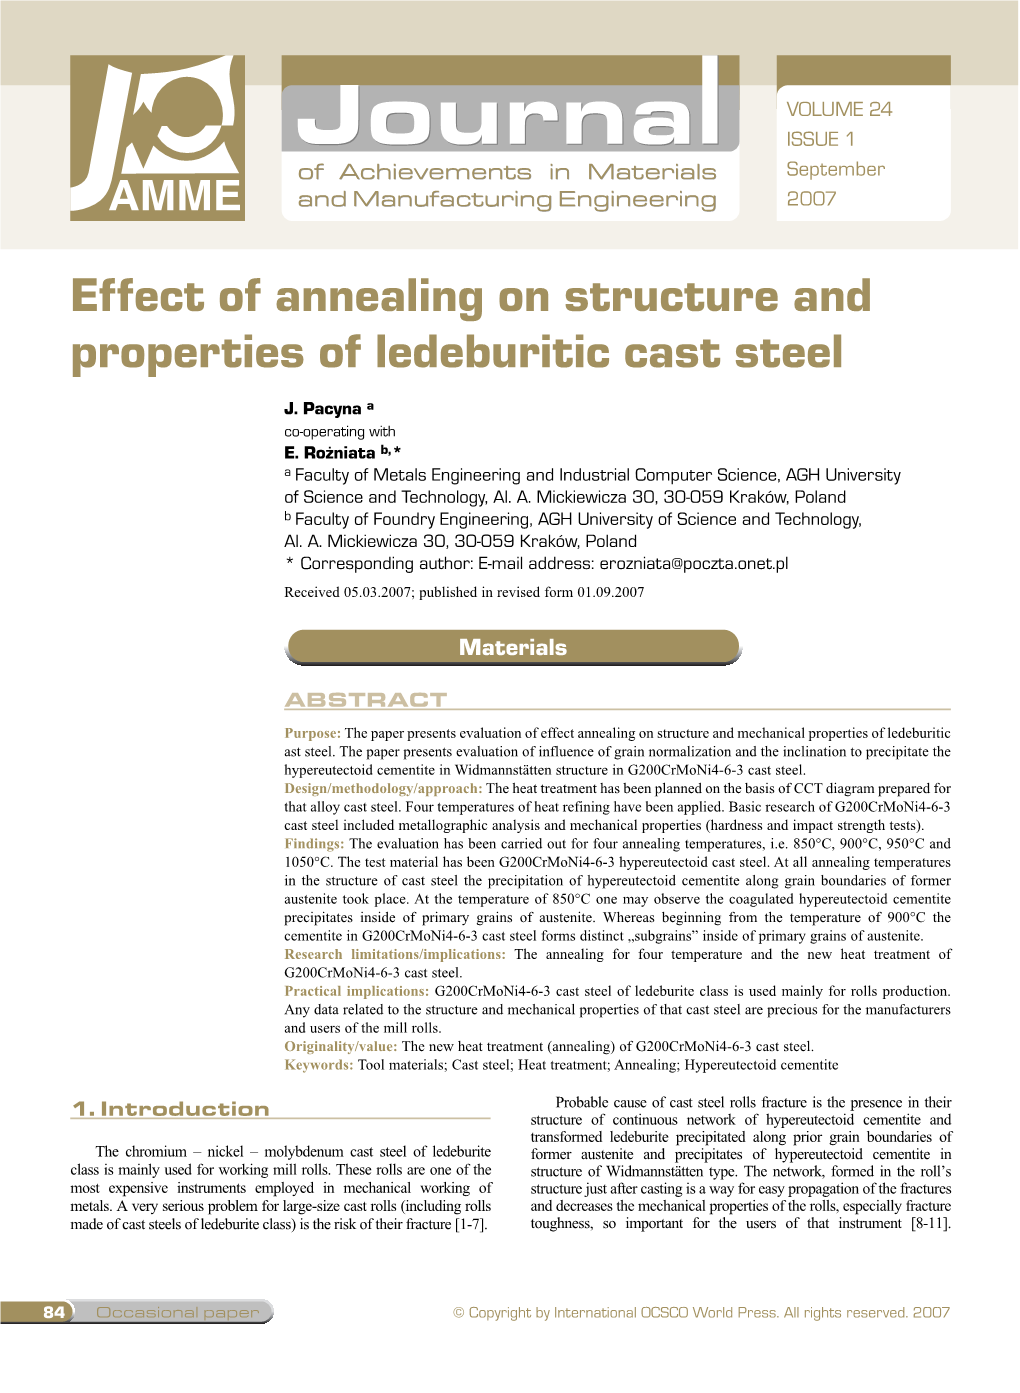 Effect of Annealing on Structure and Properties of Ledeburitic Cast Steel